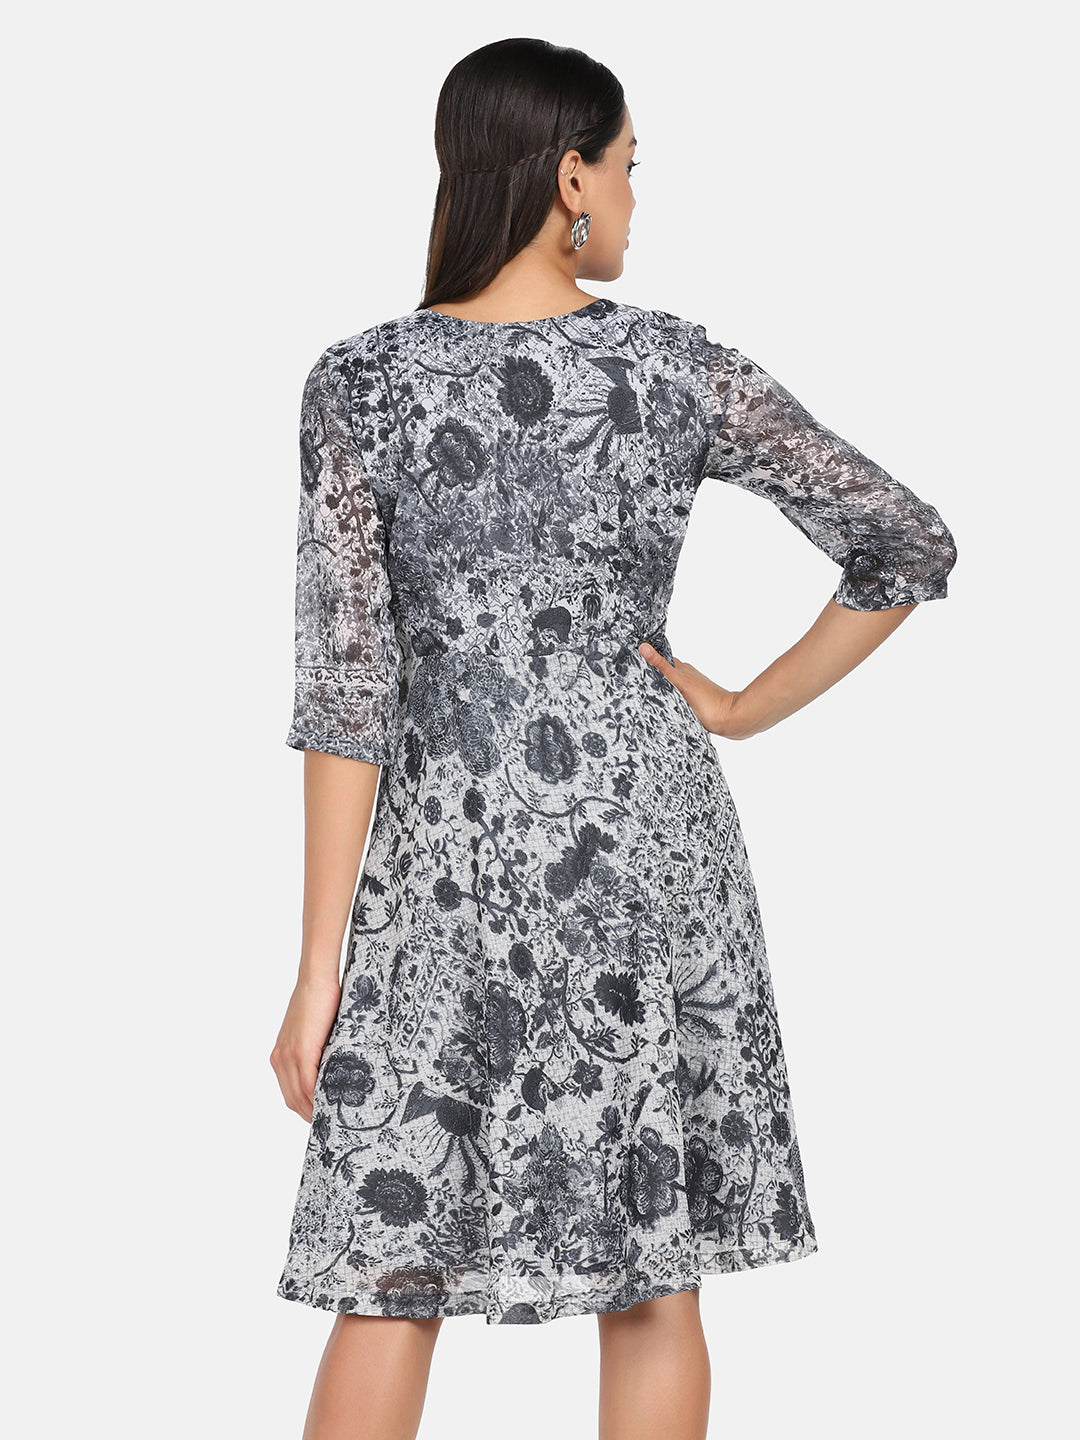 Abstract Print  Outdoor Dress - Grey and White